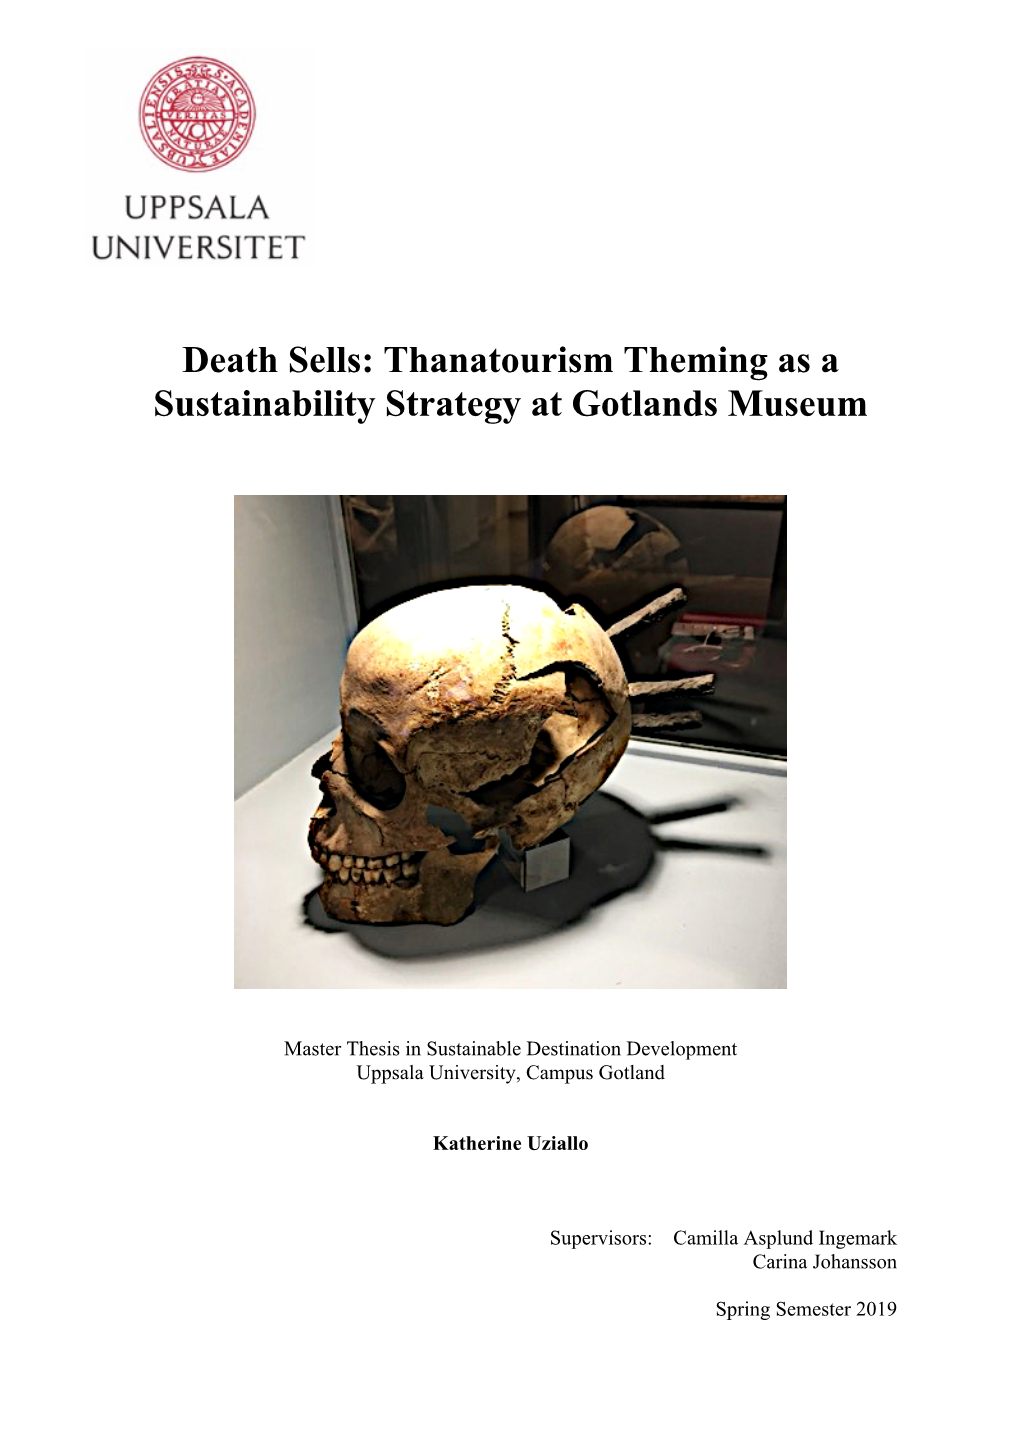 Thanatourism Theming As a Sustainability Strategy at Gotlands Museum